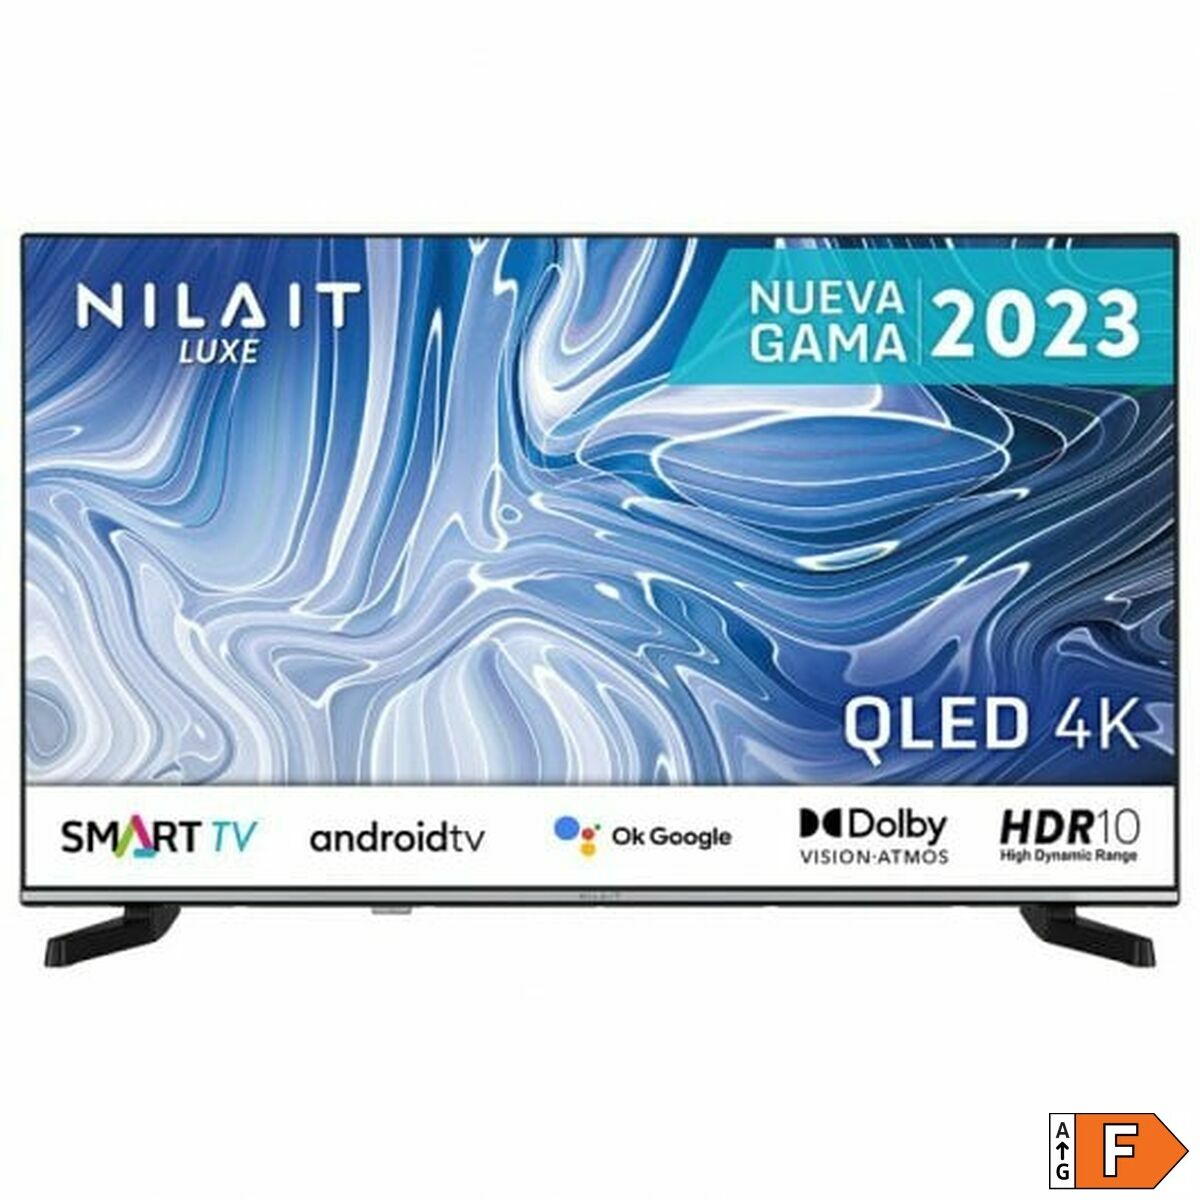 Smart TV Nilait Luxe NI-43UB8001SE 4K Ultra HD 43", Nilait, Electronics, TV, Video and home cinema, smart-tv-nilait-luxe-ni-43ub8001se-4k-ultra-hd-43, Brand_Nilait, category-reference-2609, category-reference-2625, category-reference-2931, category-reference-t-18805, category-reference-t-19653, cinema and television, Condition_NEW, entertainment, Price_300 - 400, RiotNook